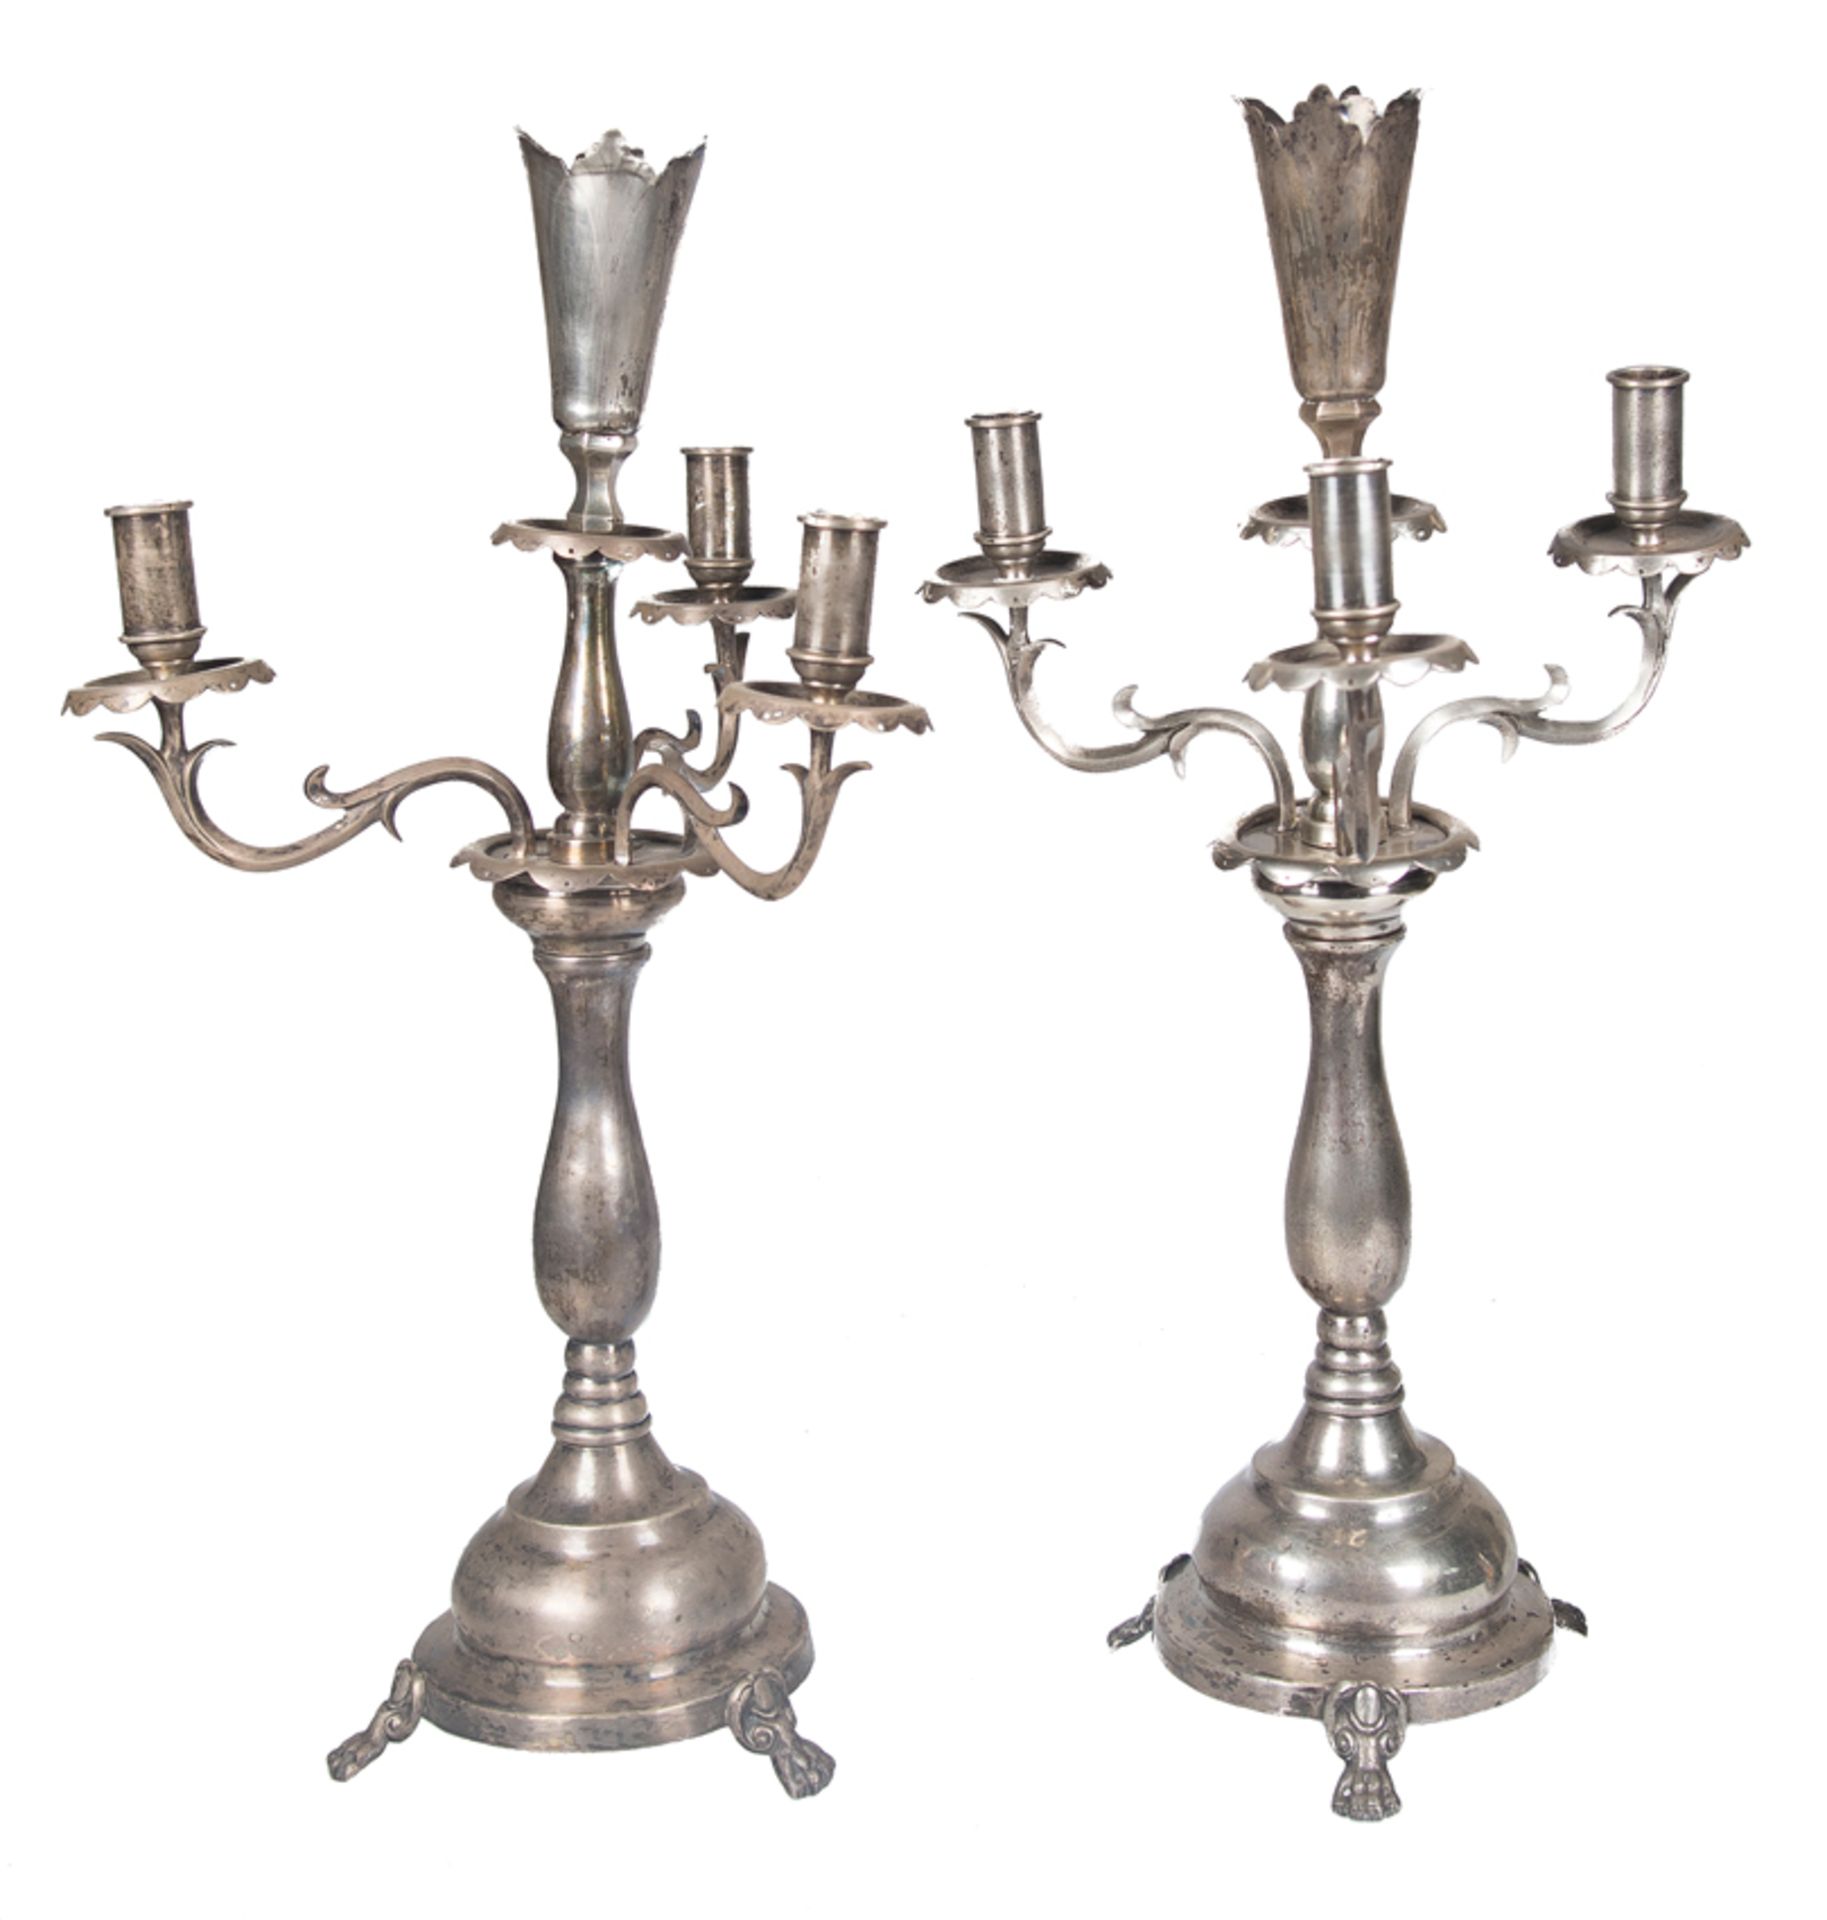 Pair of candlesticks of four lights in silver metal. Early 20th century.